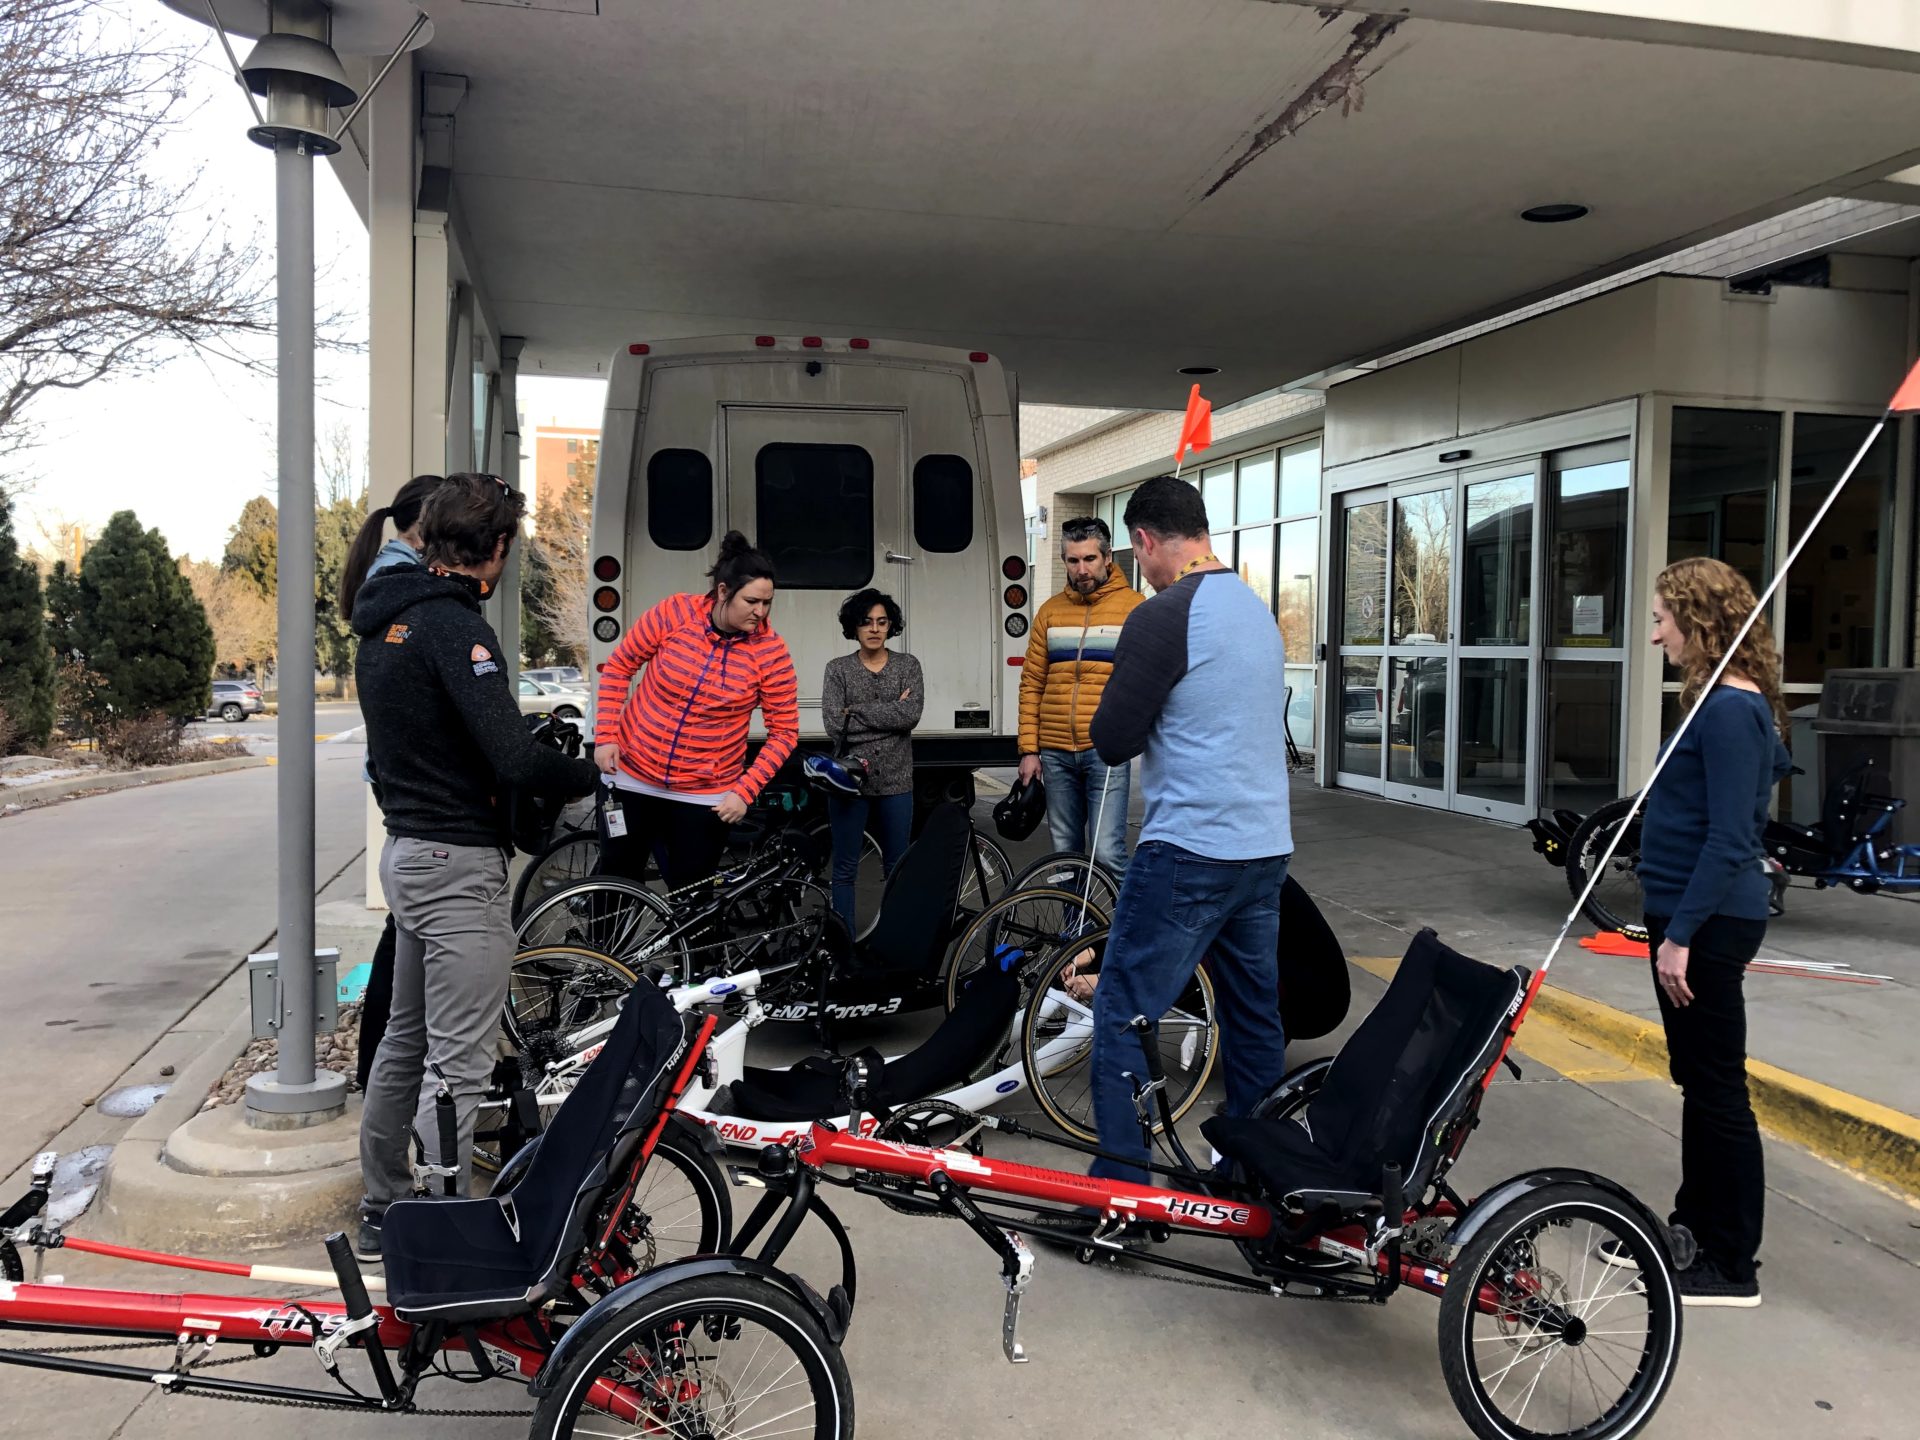 A group of people stand around a number of adaptive bikes under an awning in front of a building.